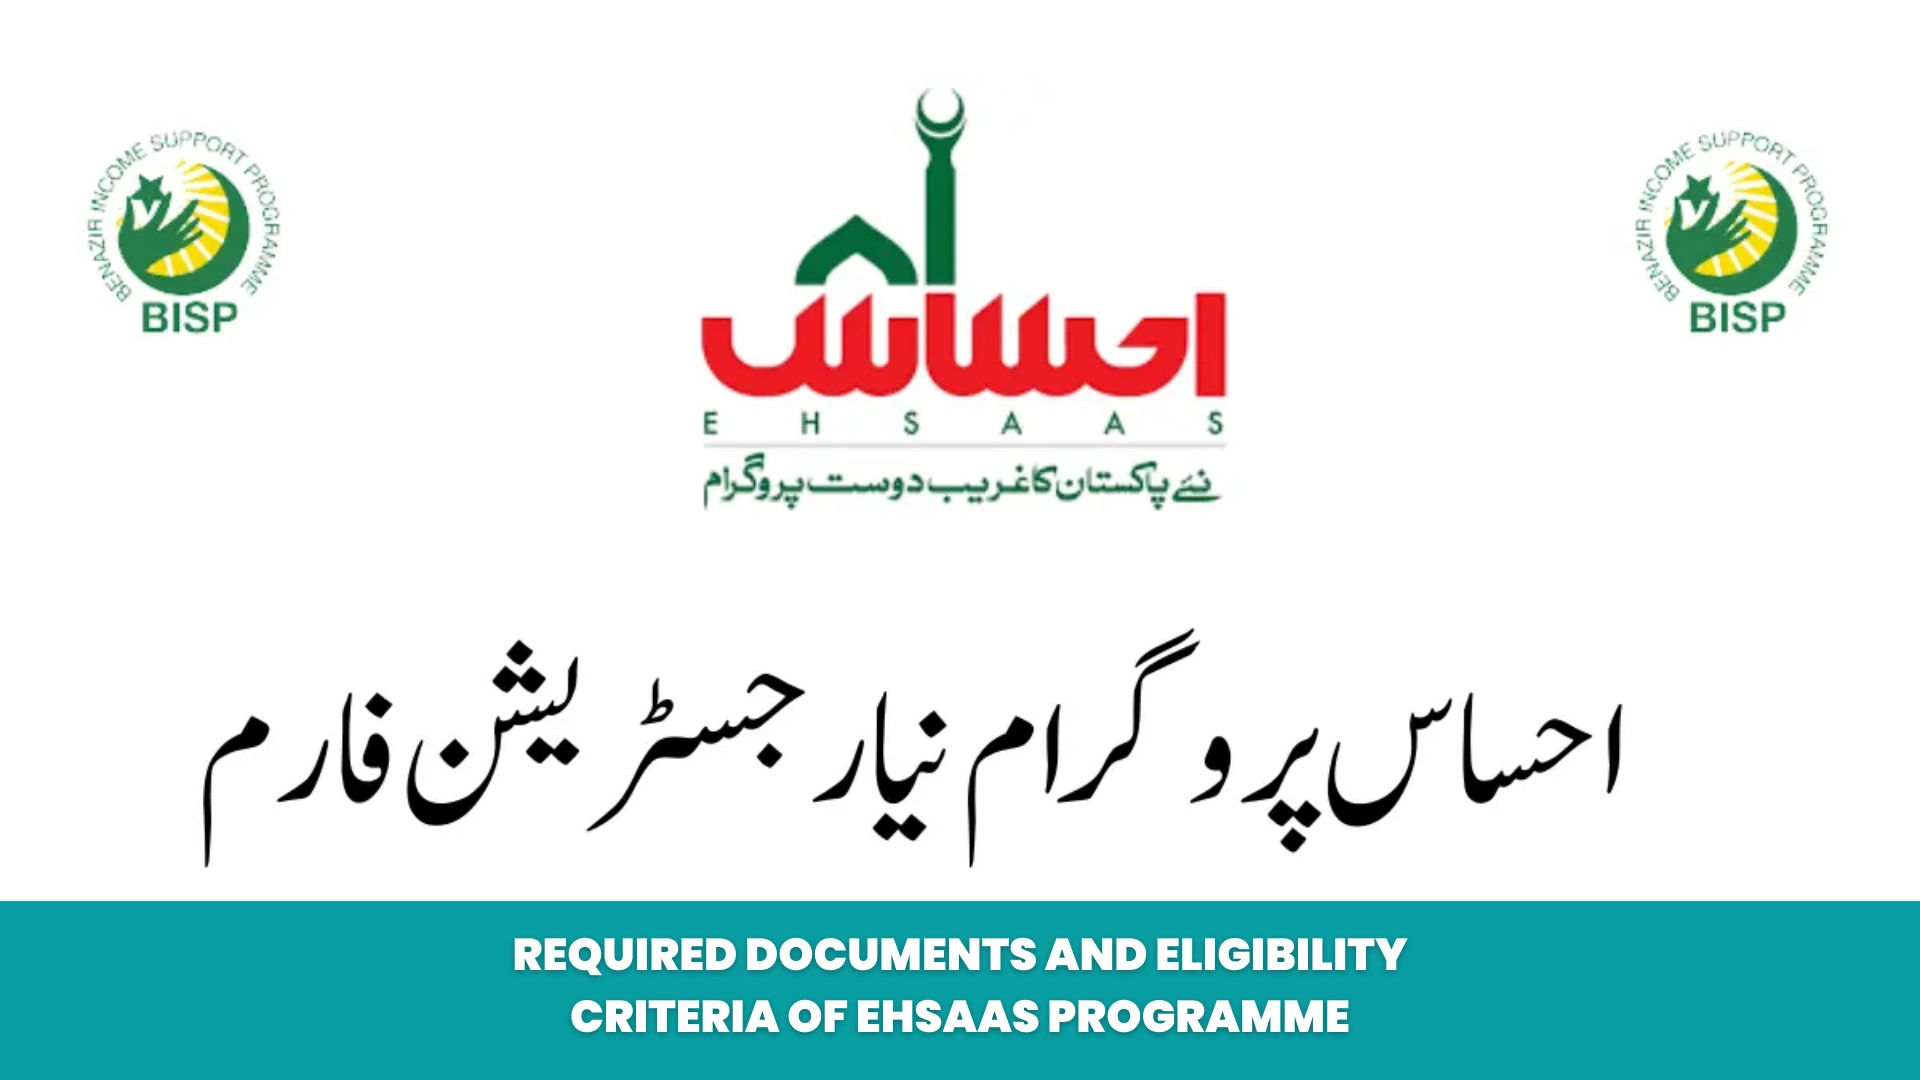 Required Documents and Eligibility Criteria of Ehsaas Programme